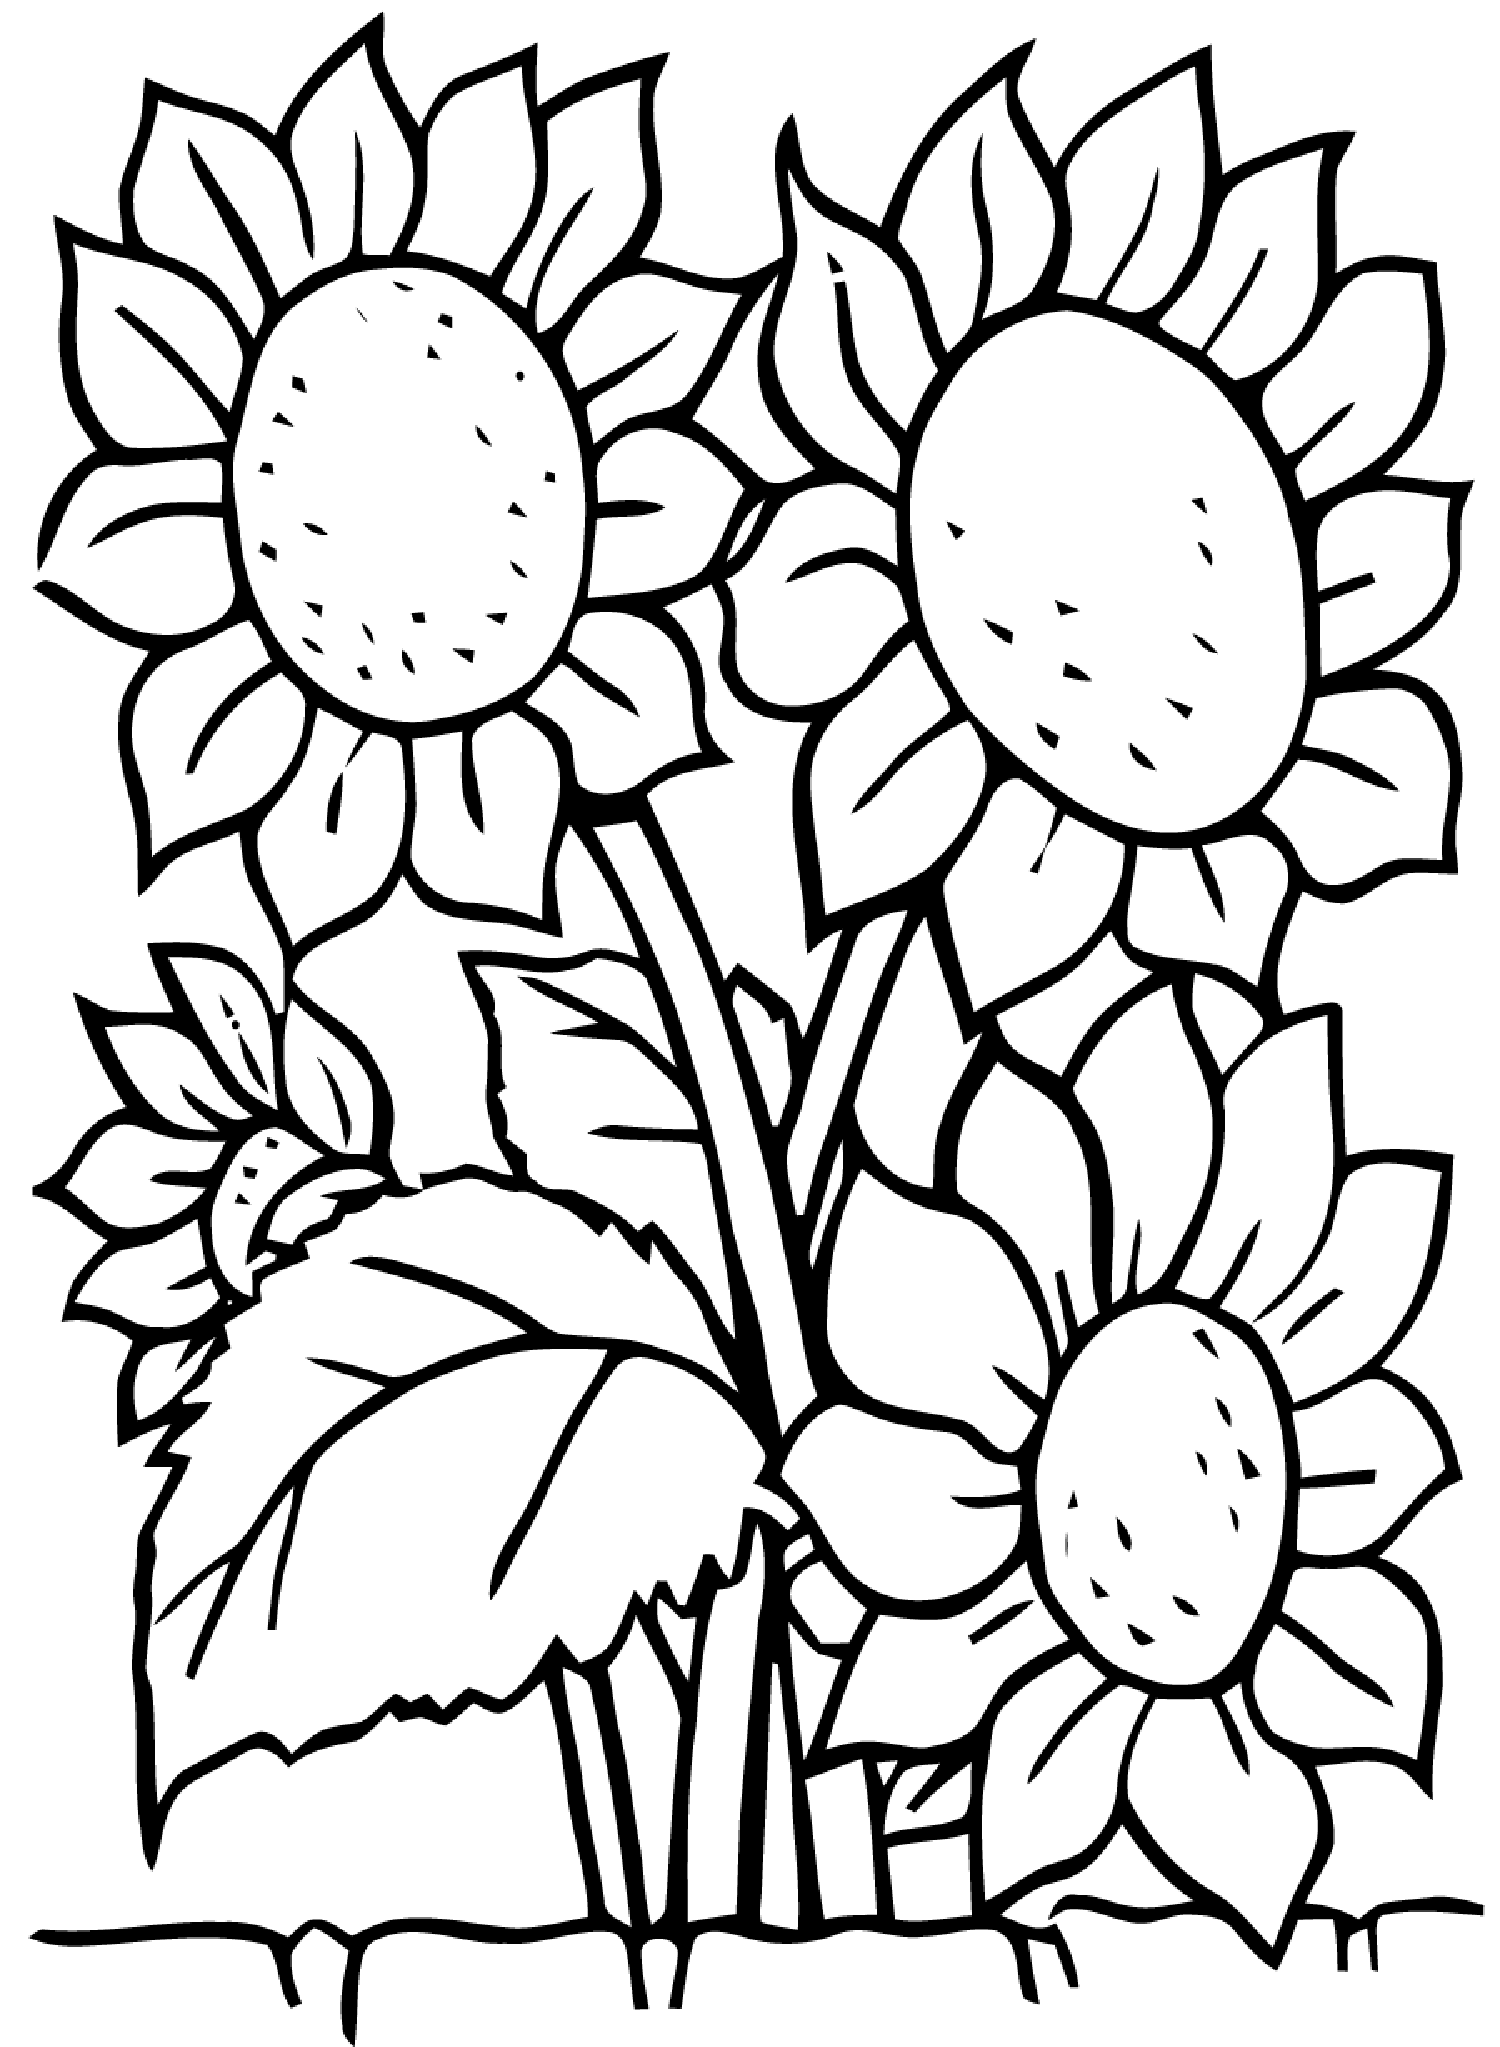 Sunflowers - Flowers Coloring pages for kids to print & color